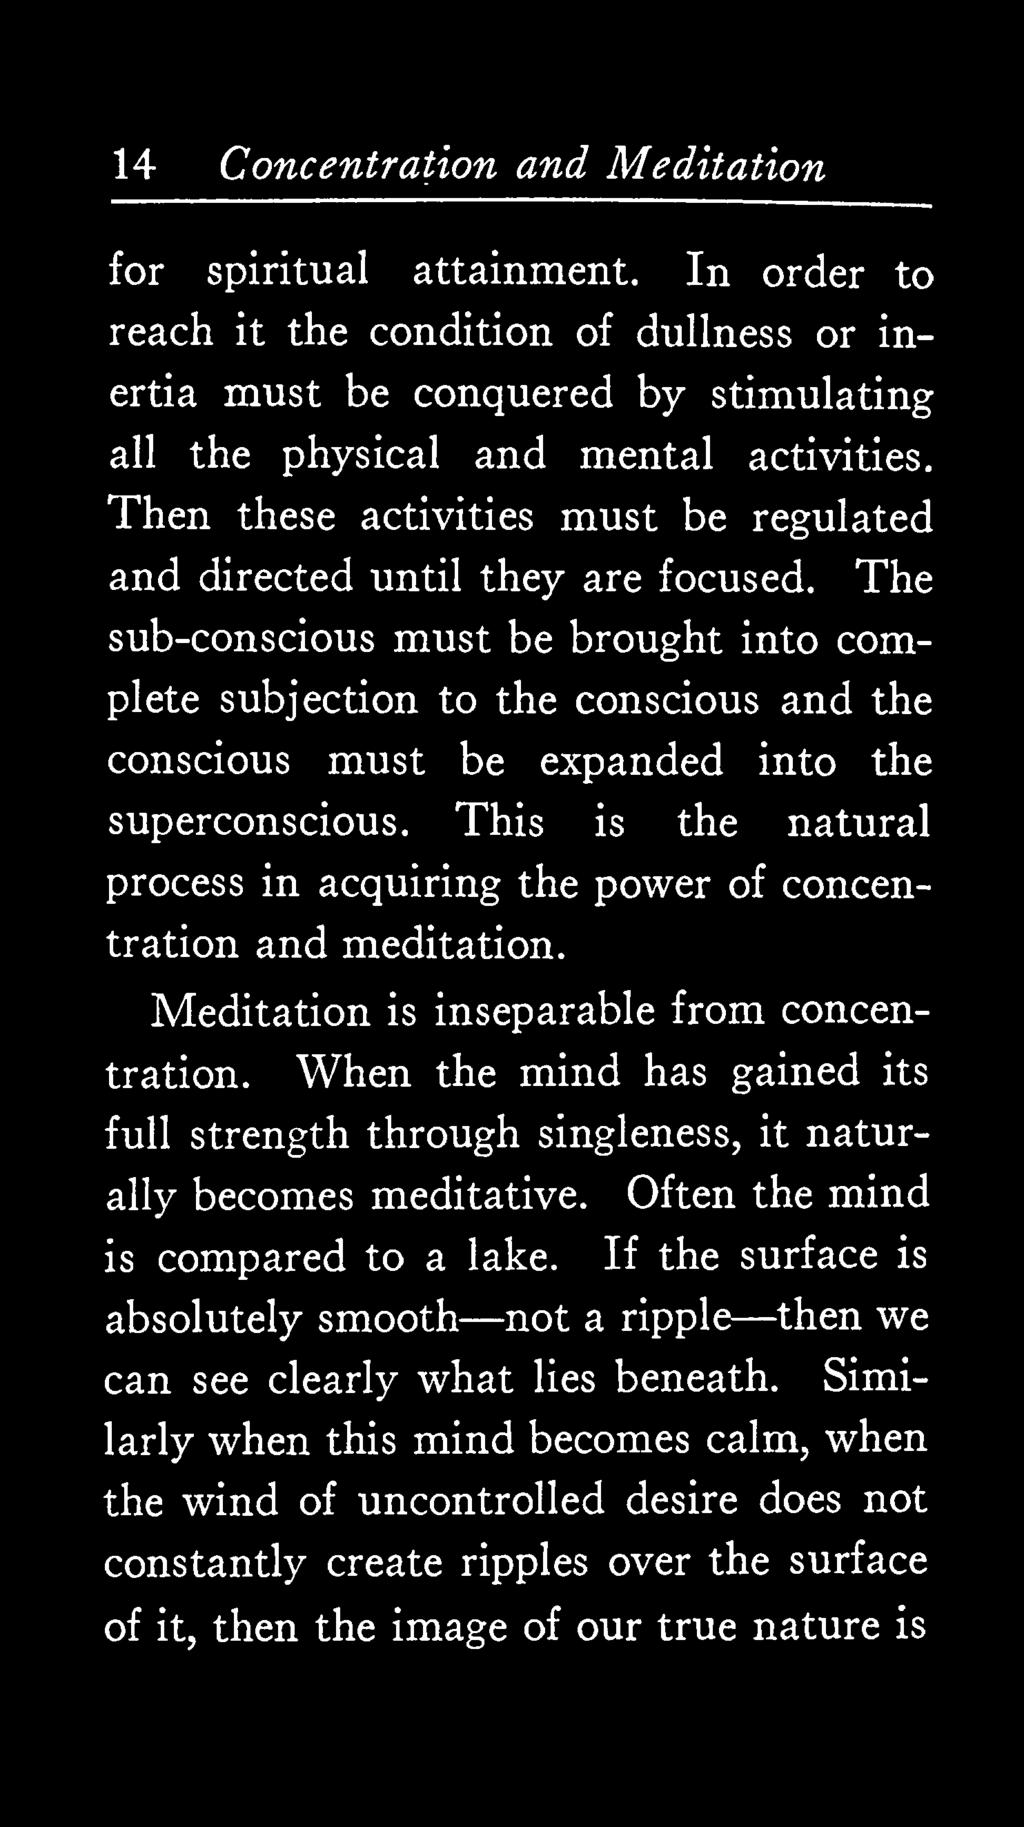 The sub-conscious must be brought into complete subjection to the conscious and the conscious must be expanded into the superconscious.